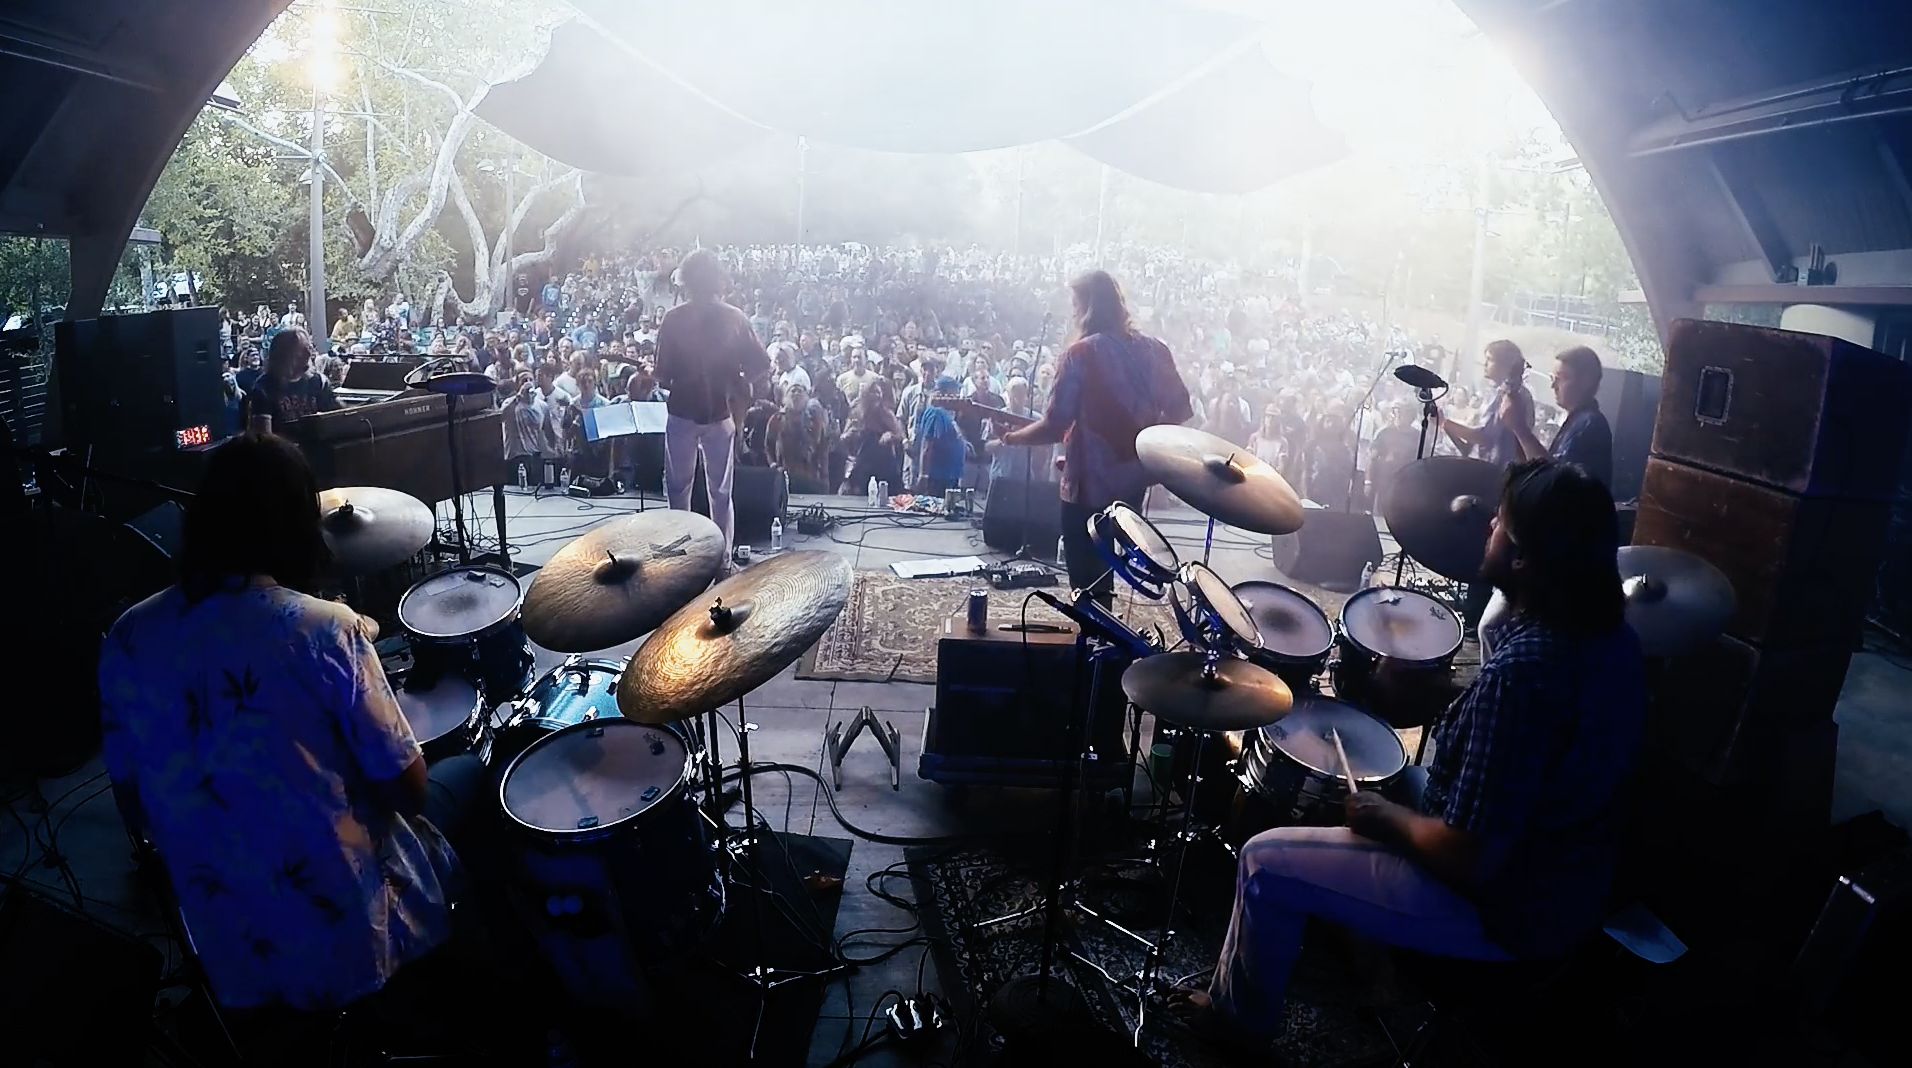 Video Premiere: Grateful Shred “They Love Each Other” and “Iko Iko” Live in Ojai, Calif.